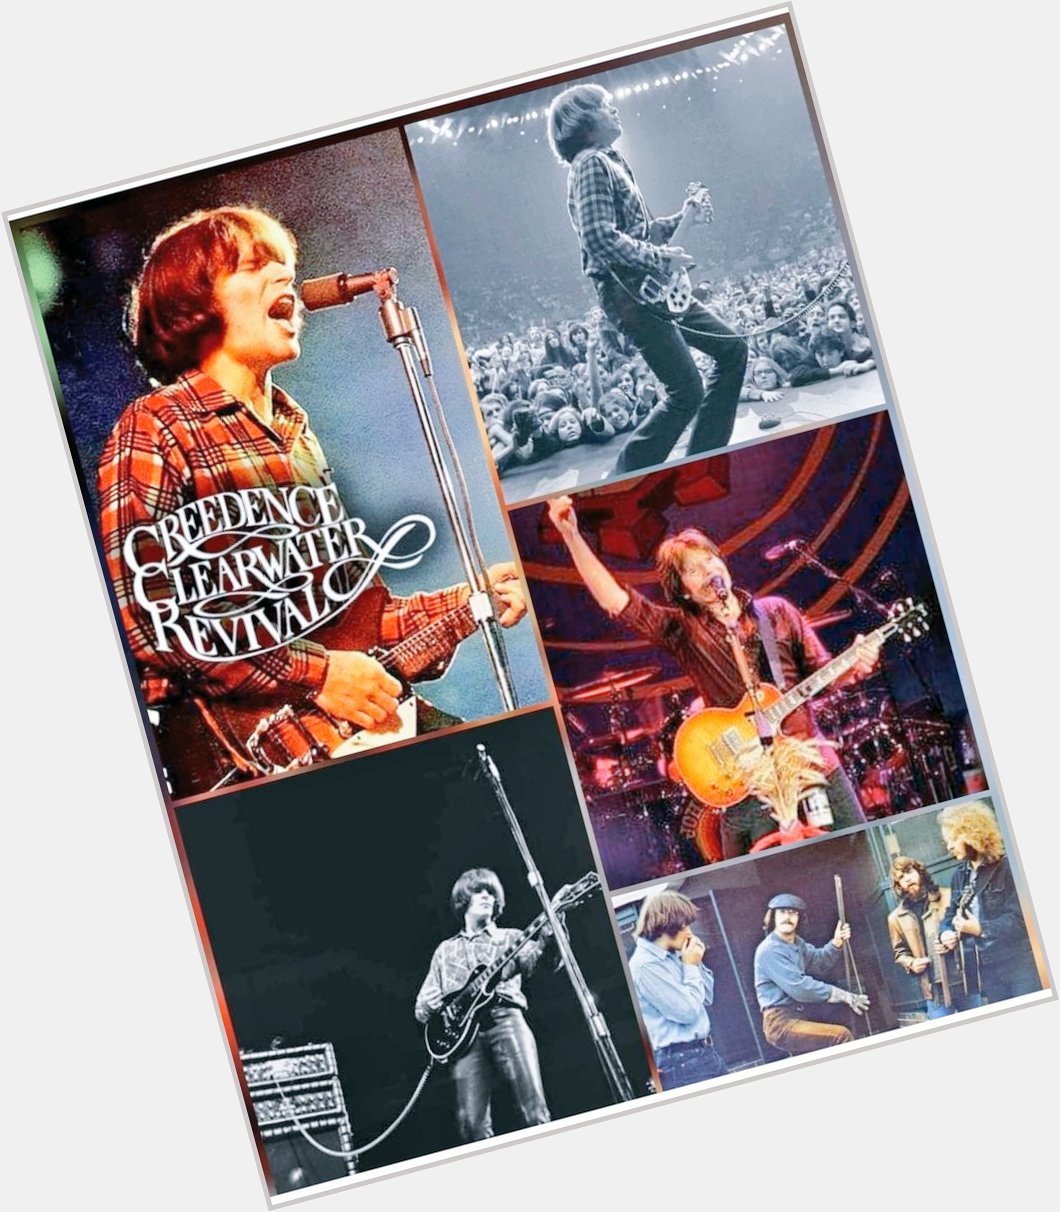   Happy 77th birthday to Creedence Clearwater Revival founder & frontman, John Fogerty  